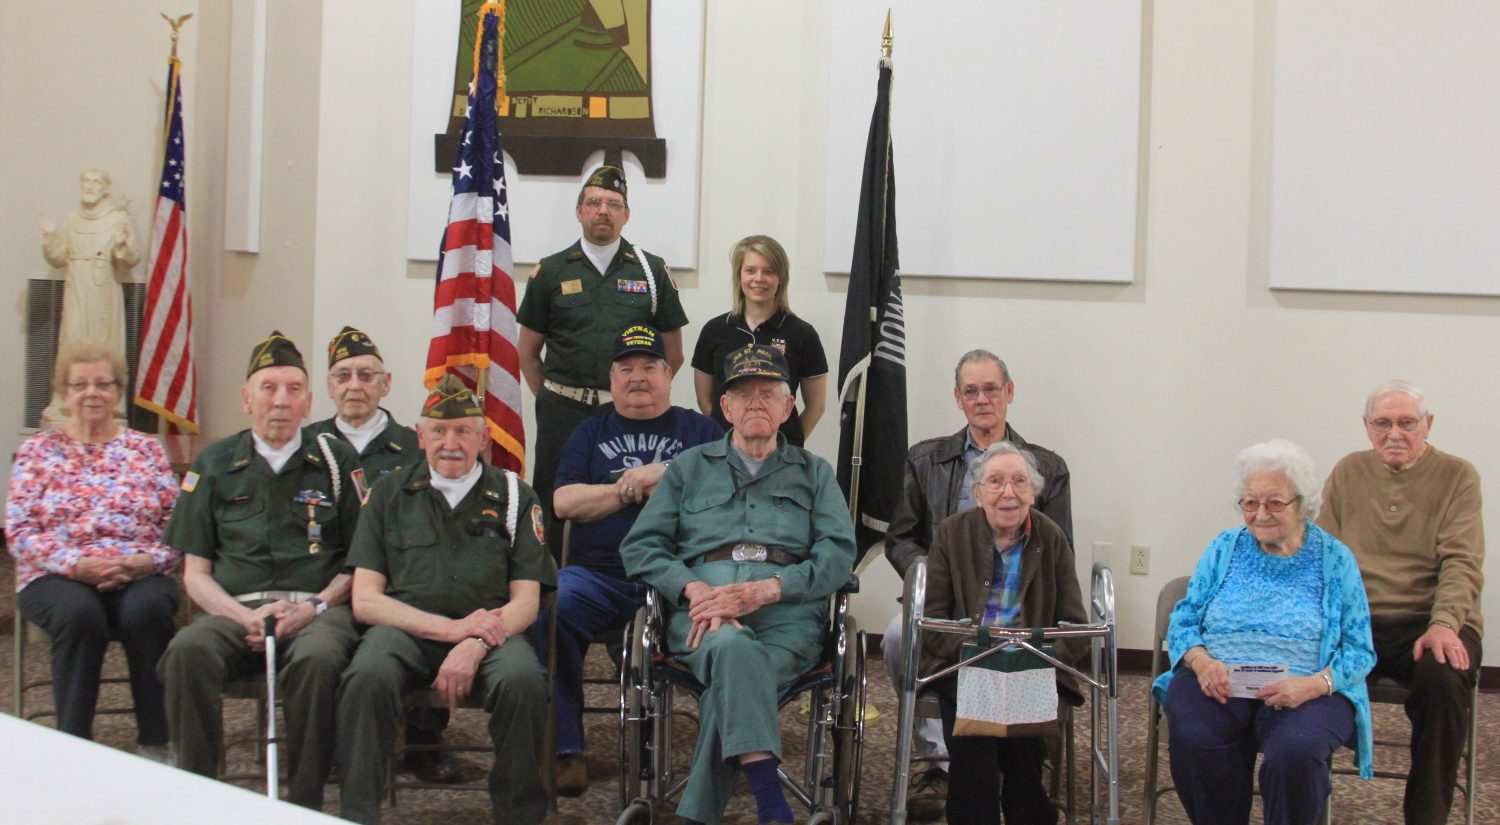 VFW Post holds Service Pin ceremonies